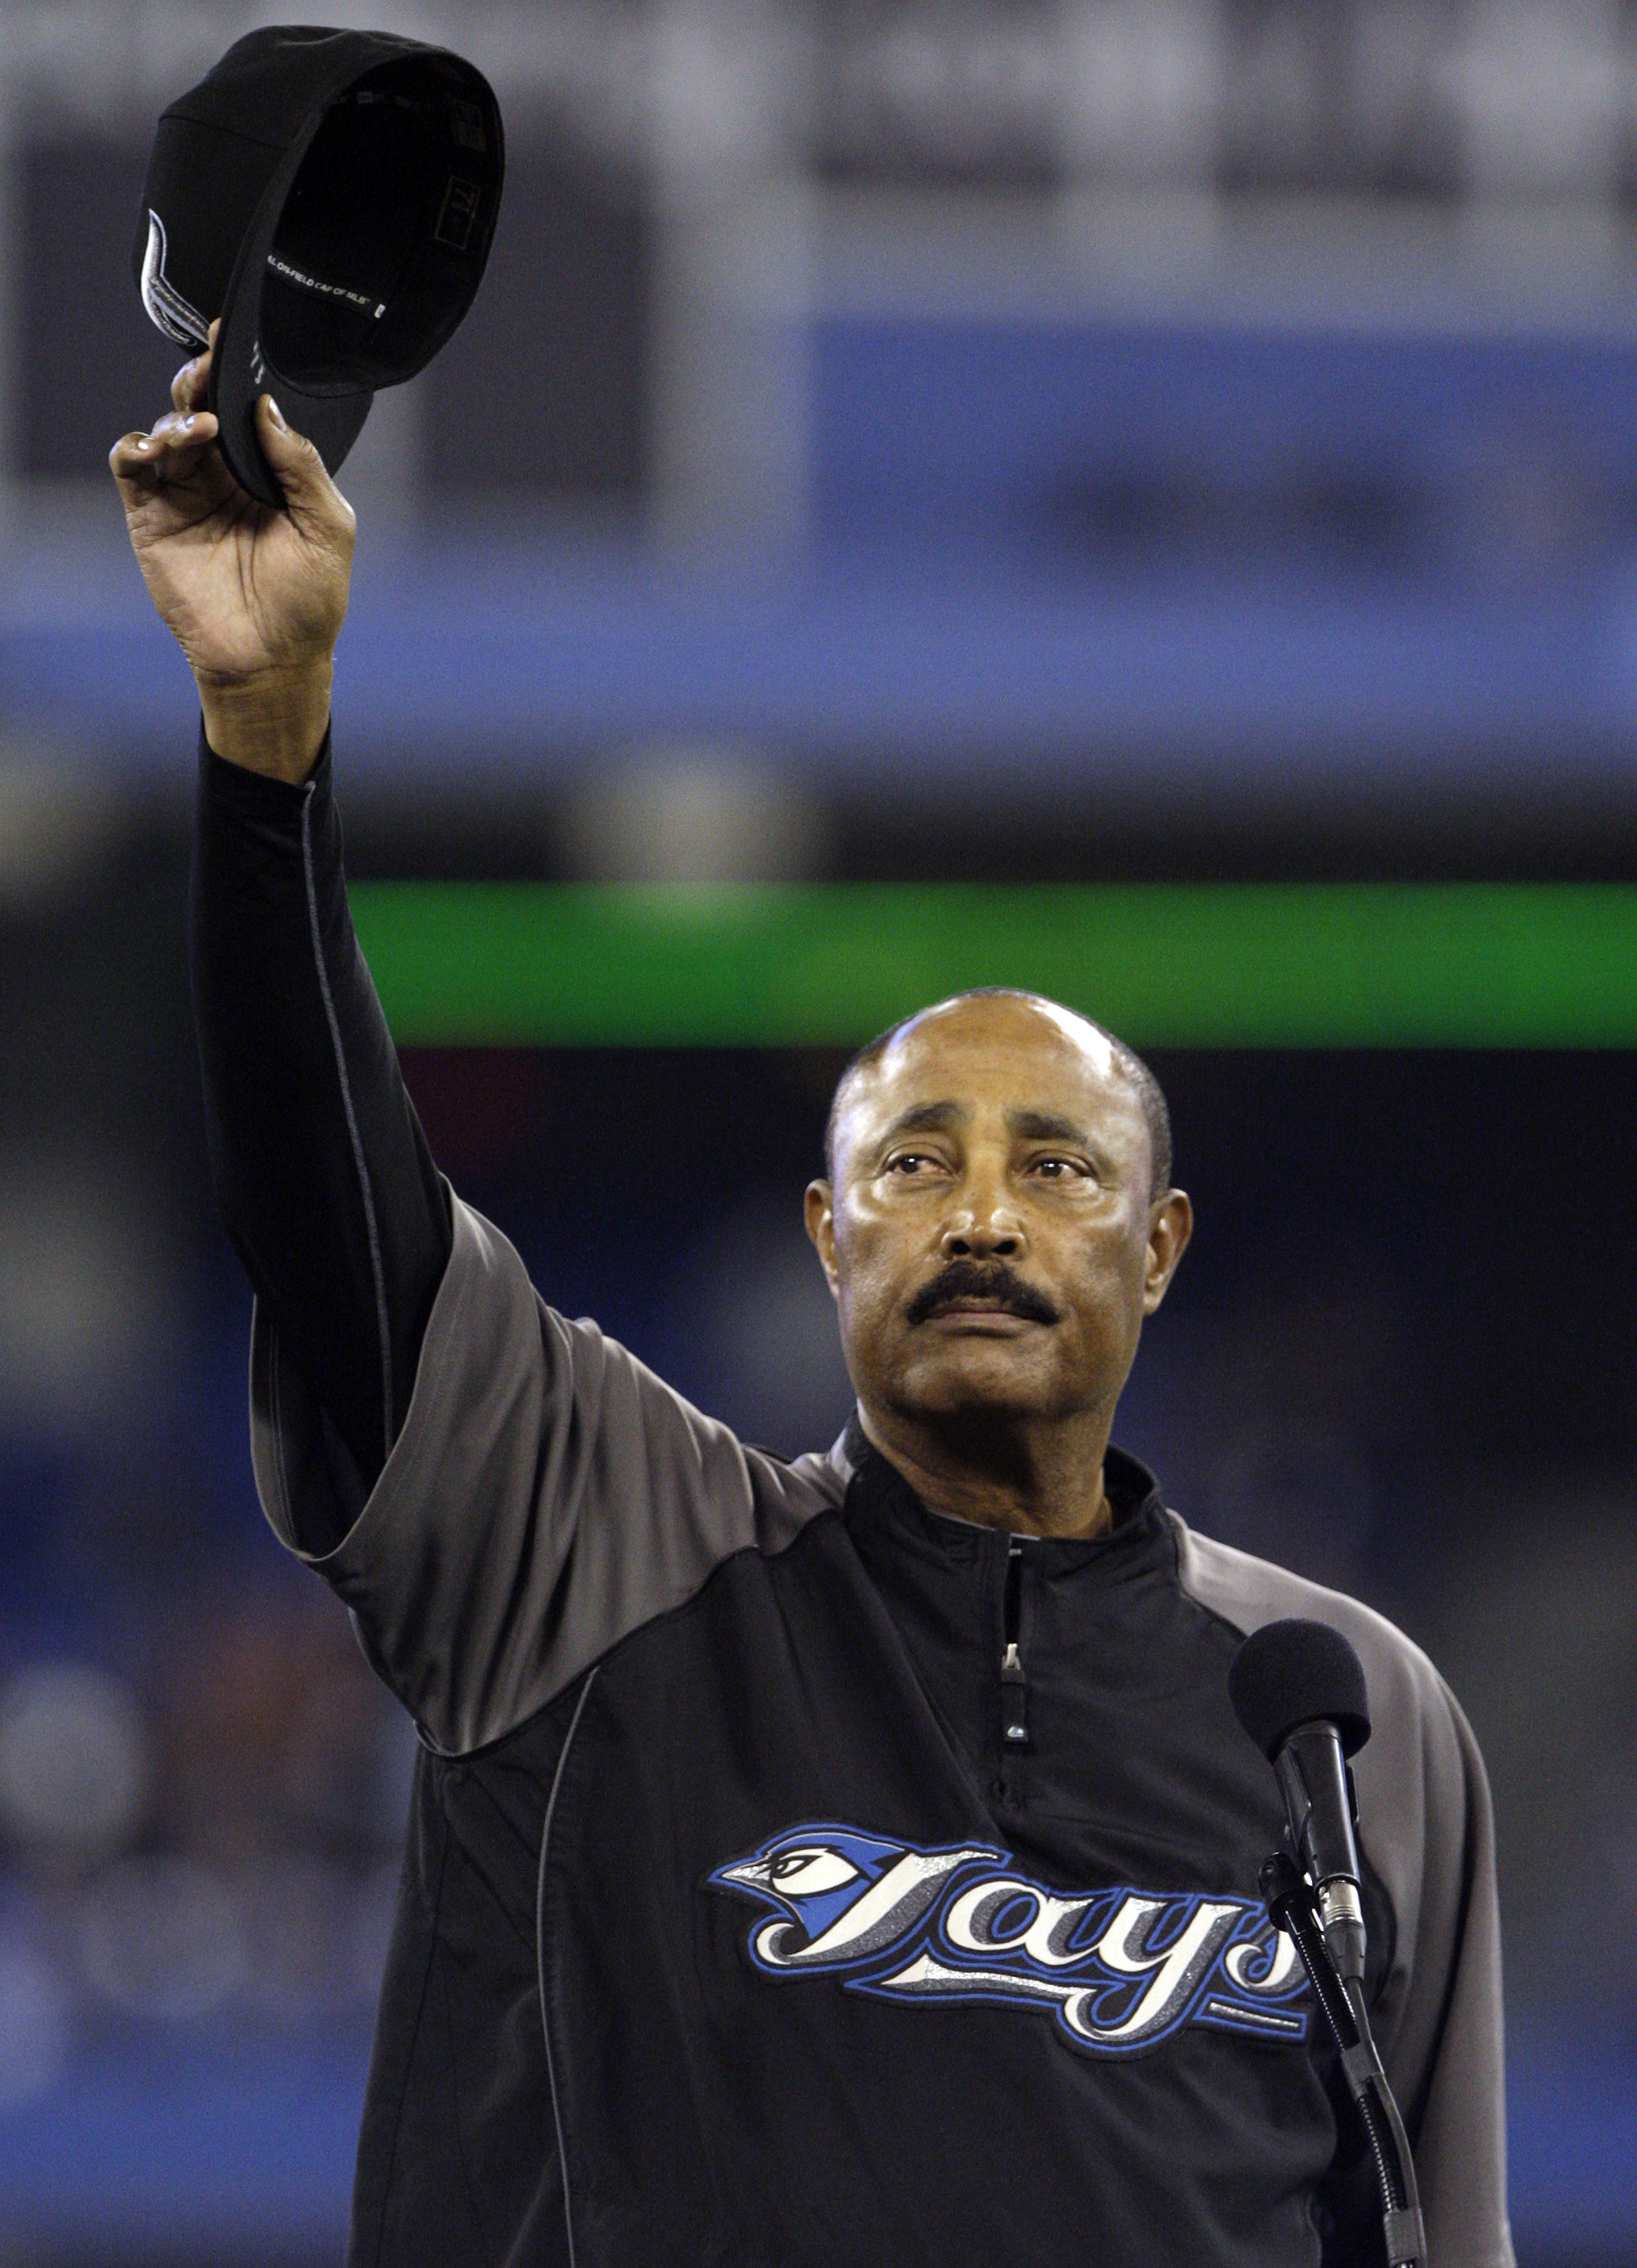 TORONTO, ON - SEPTEMBER 29: Cito Gaston tips his hat during a pre-game ceremony for retiring Manager Cito Gaston of the Toronto Blue Jays as they play the New York Yankees during a MLB game at the Rogers Centre September 29, 2010 in Toronto, Ontario, Cana